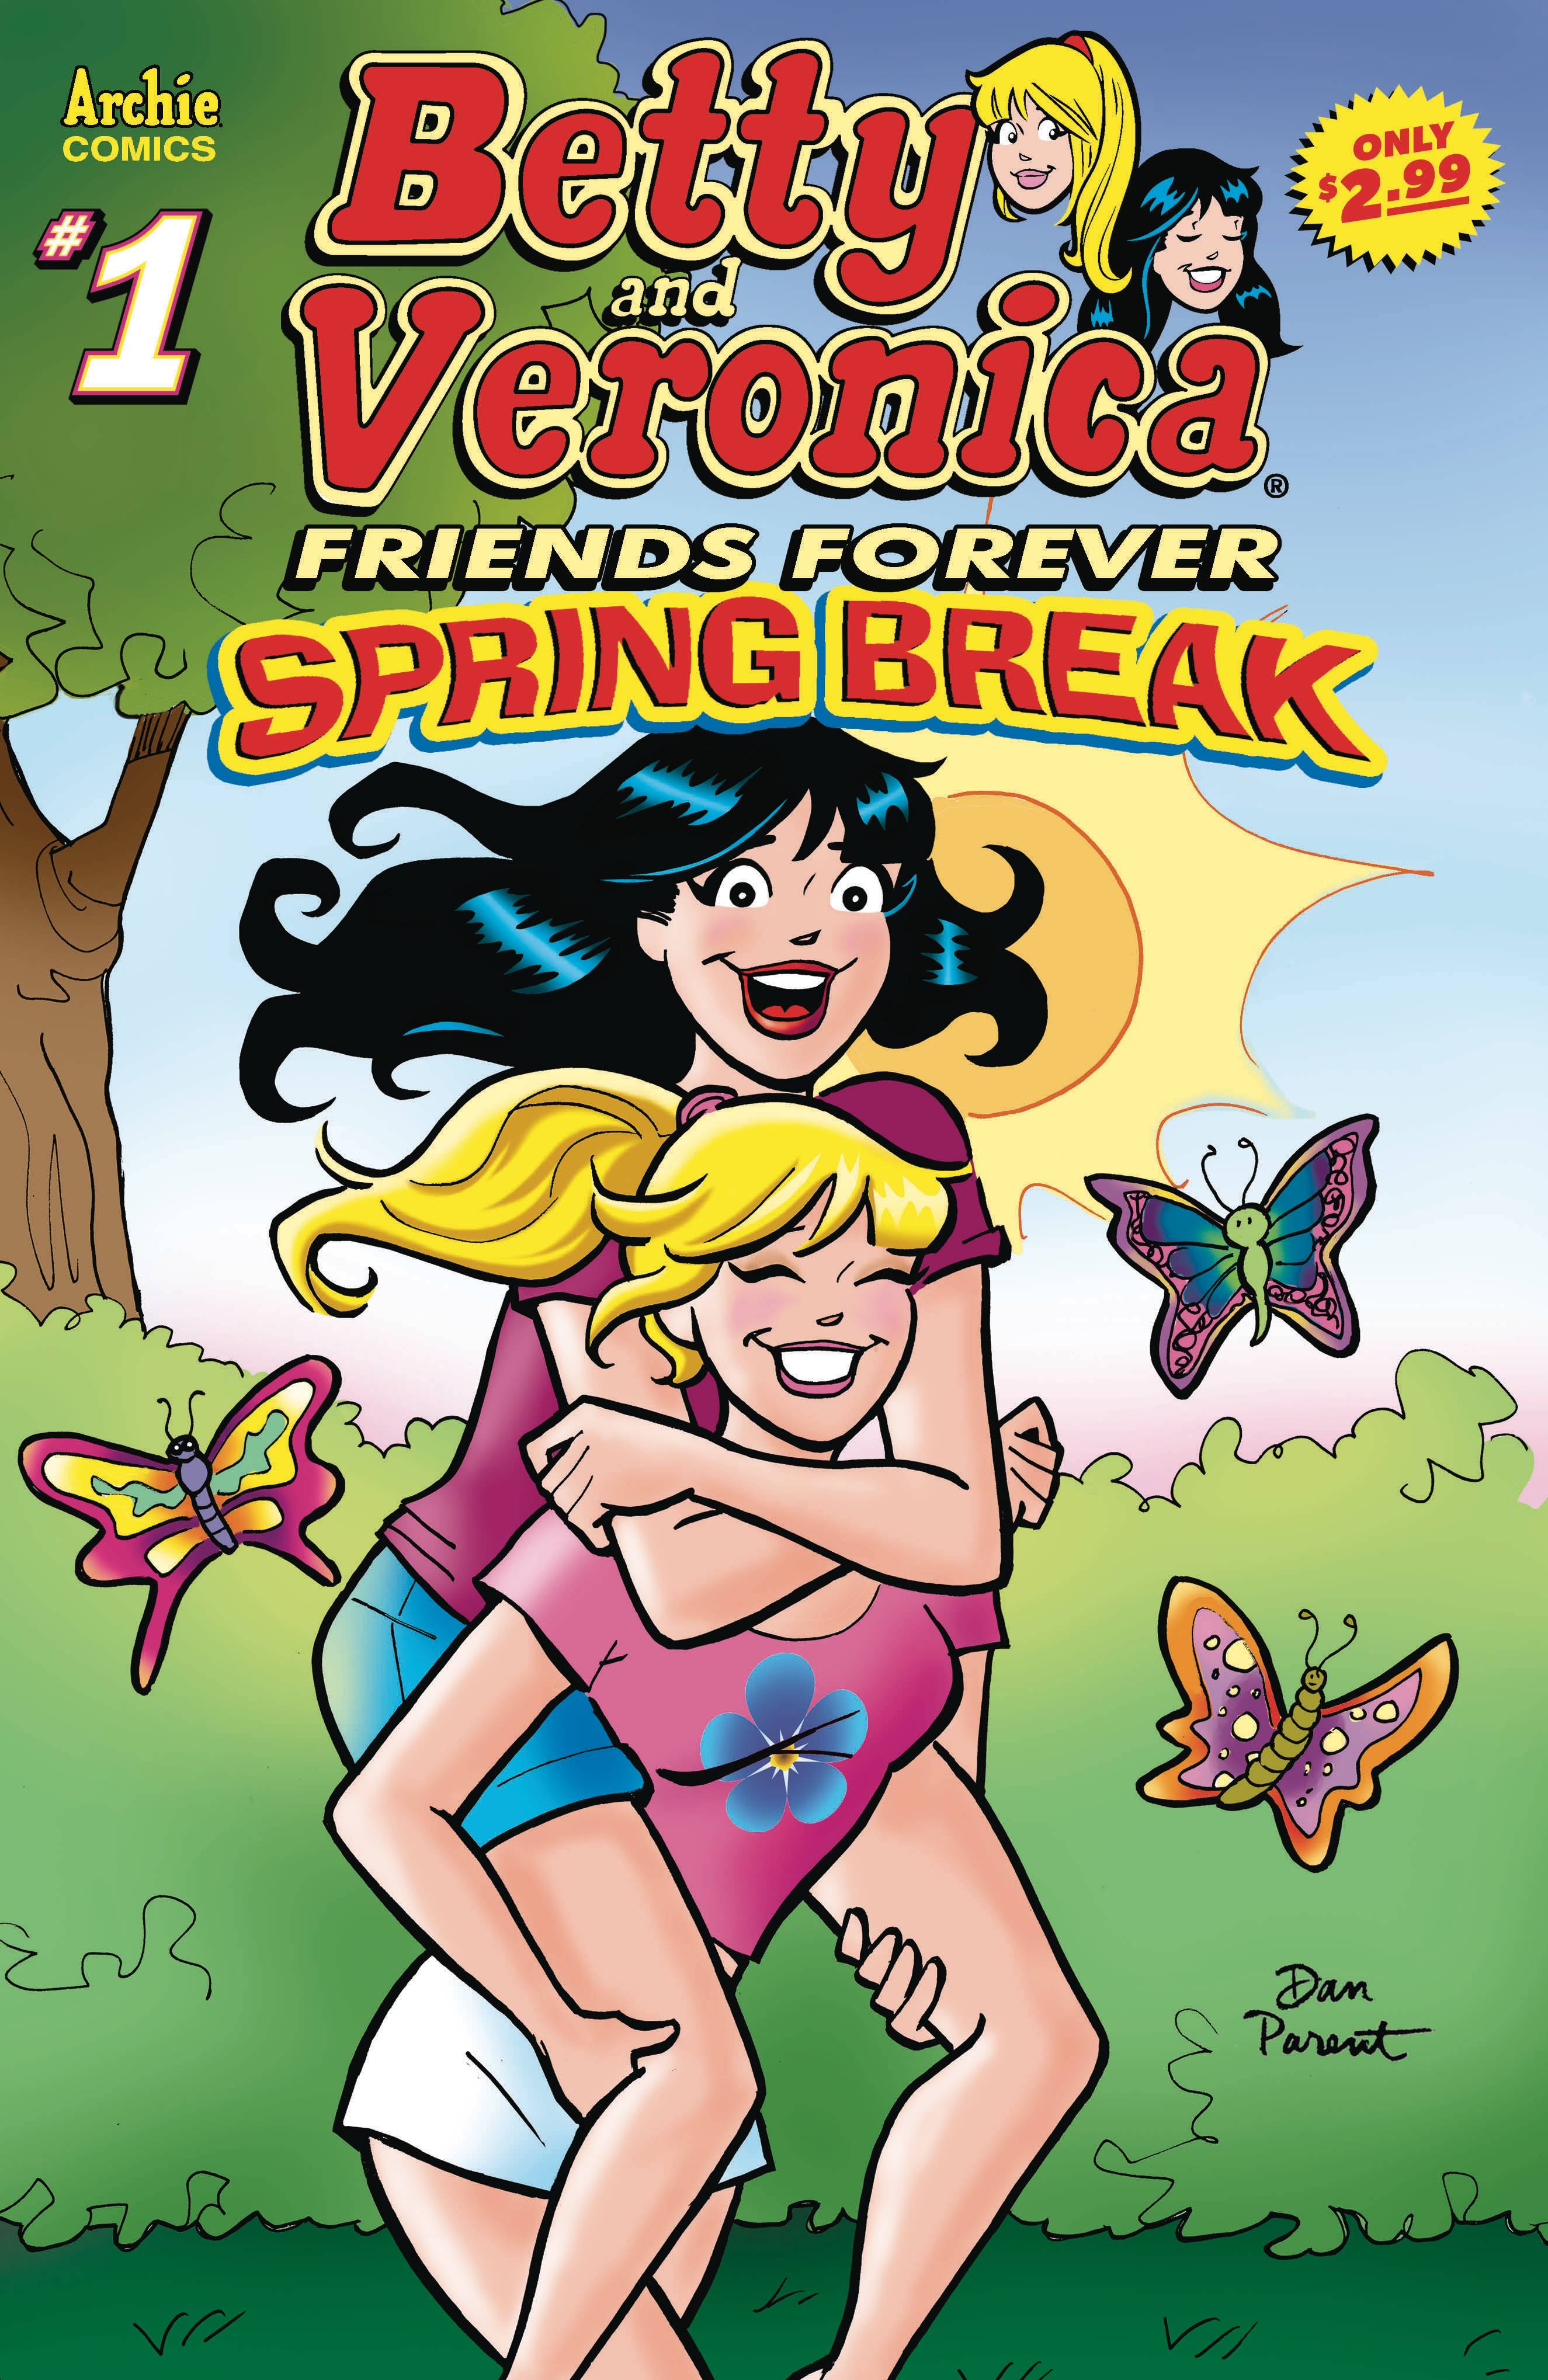 BETTY AND VERONICA FRIENDS FOREVER